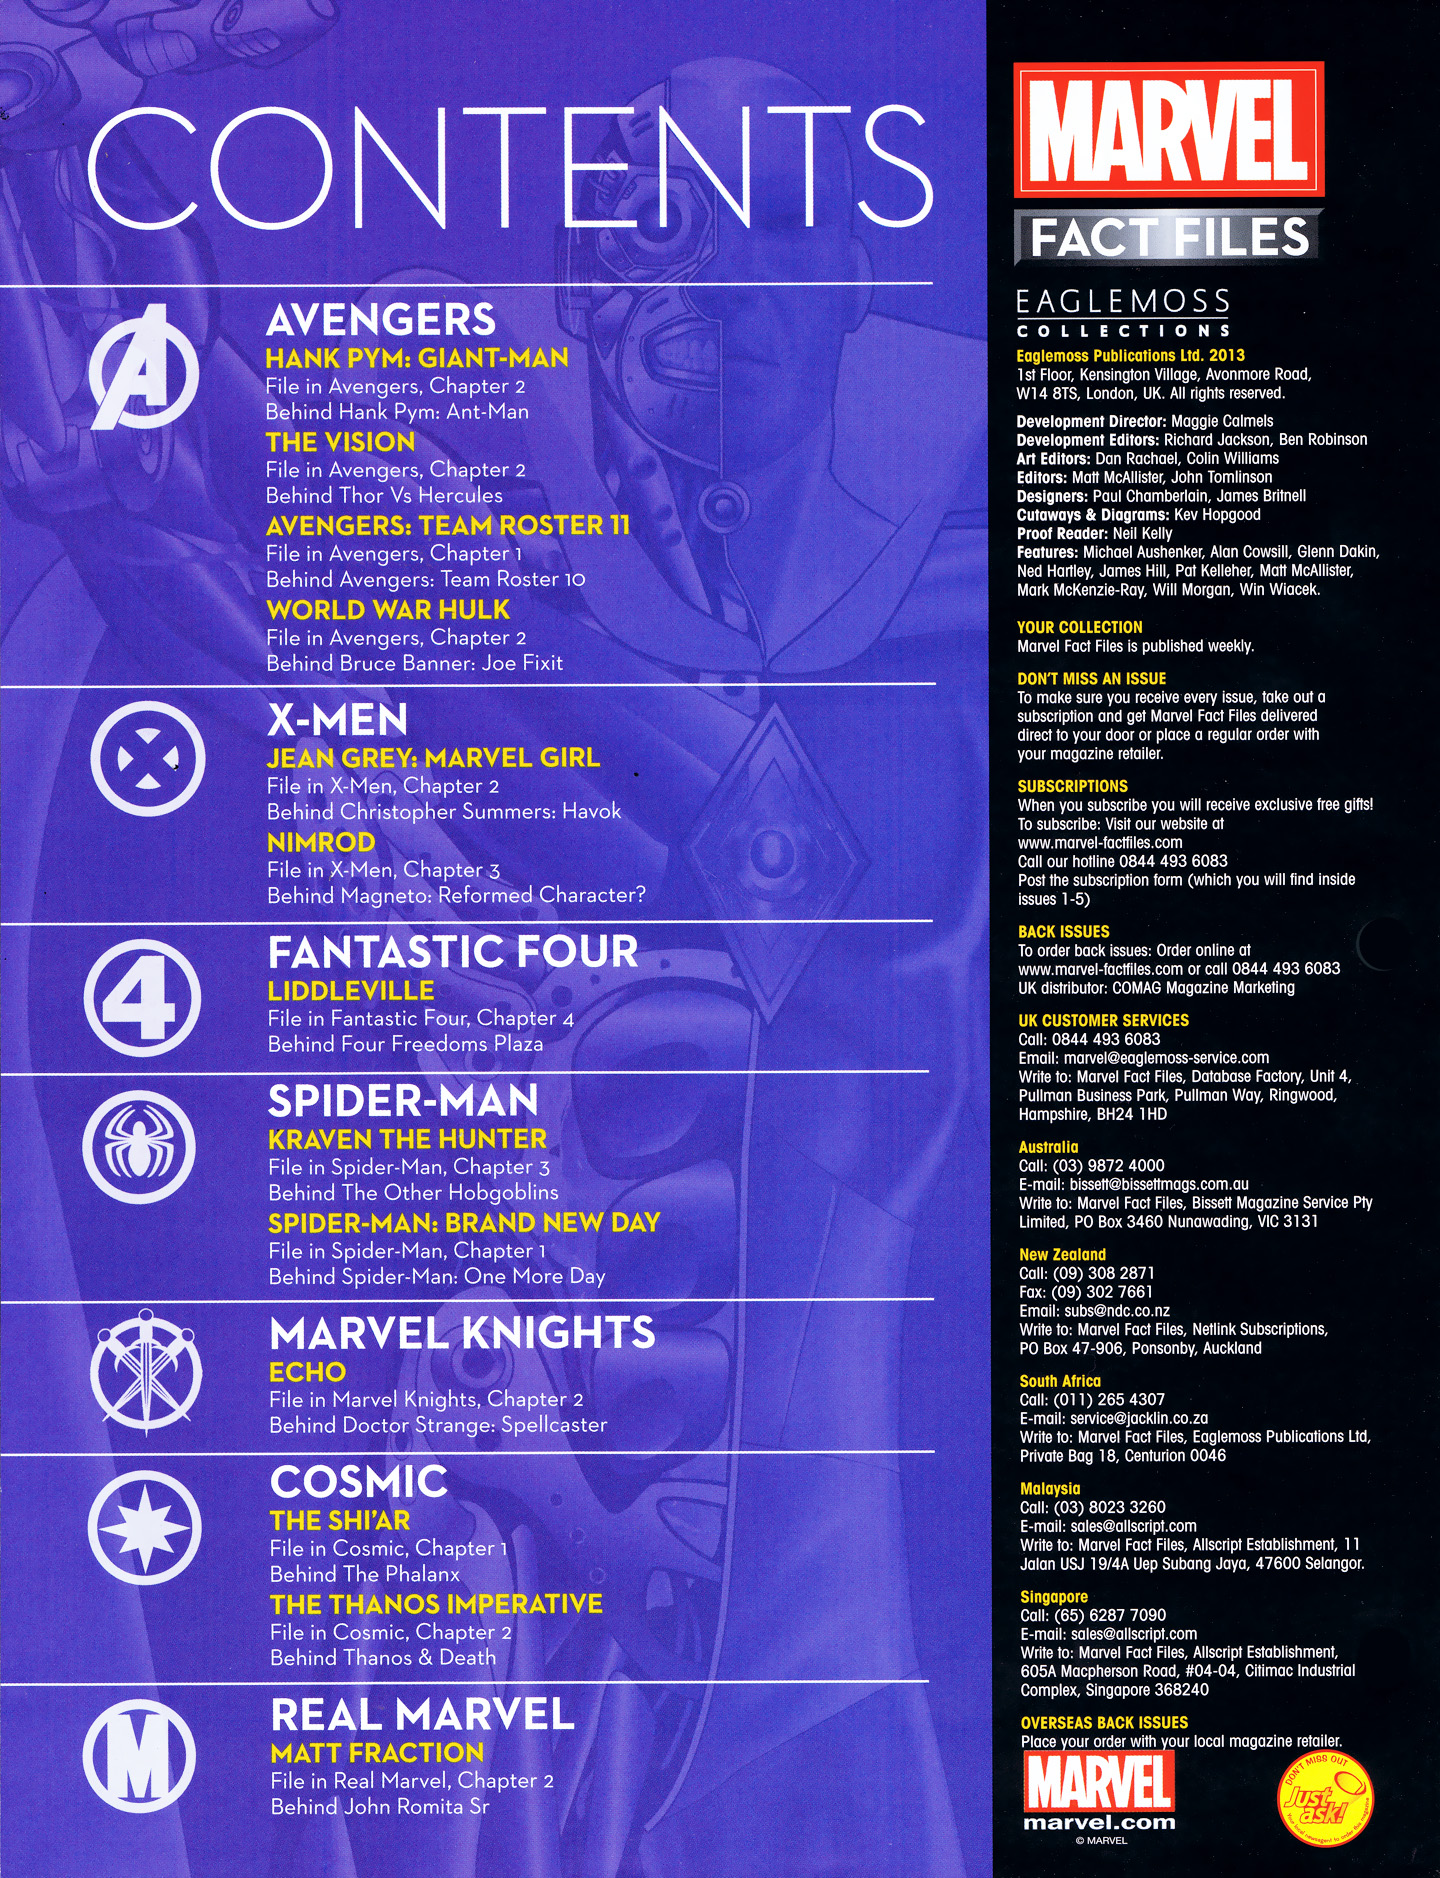 Read online Marvel Fact Files comic -  Issue #38 - 3